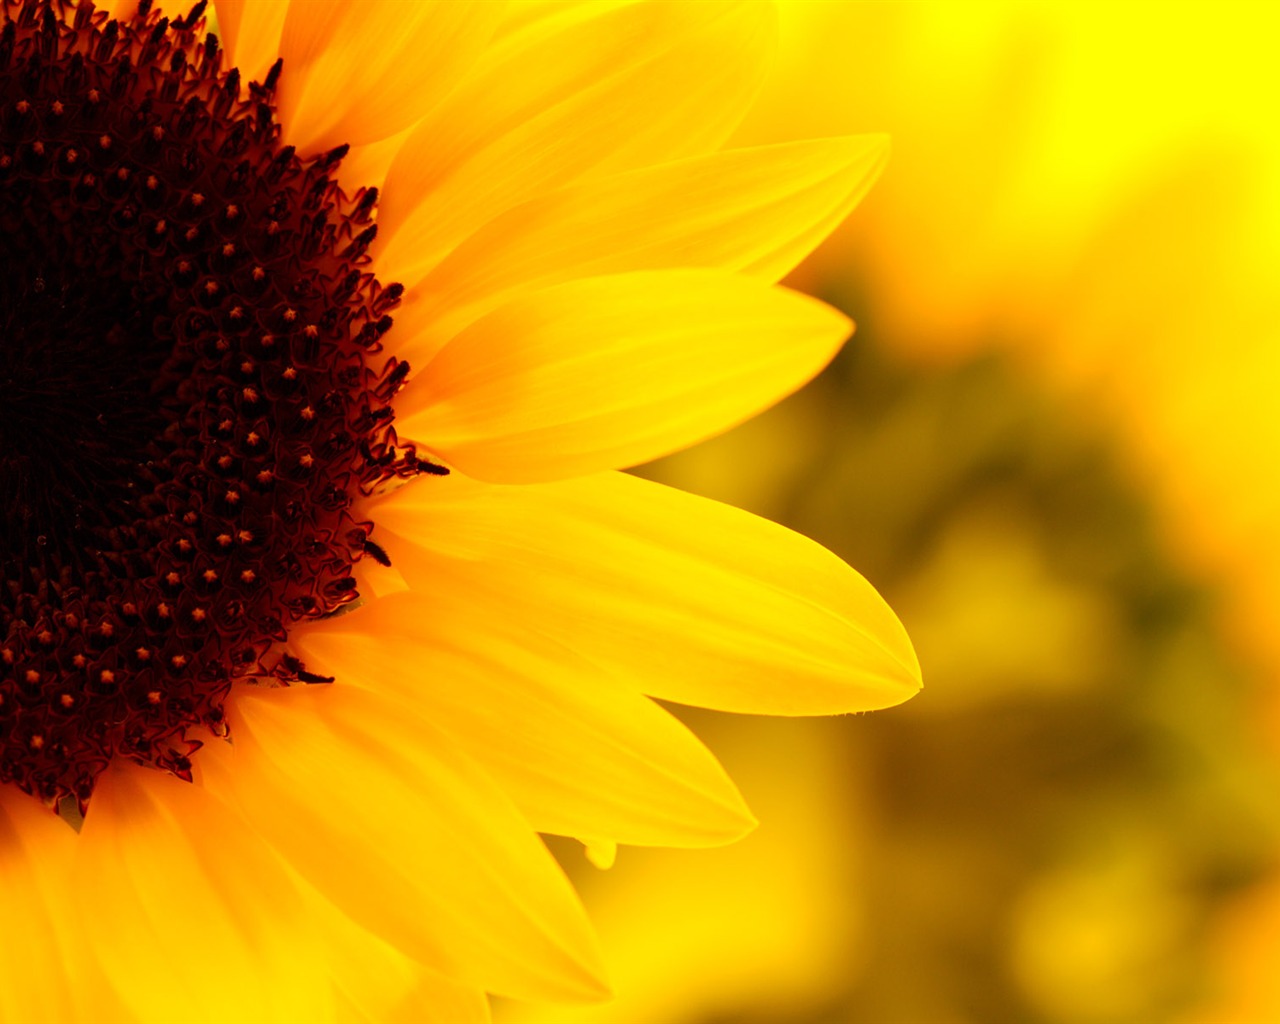 Sunny sunflower photo HD Wallpapers #10 - 1280x1024